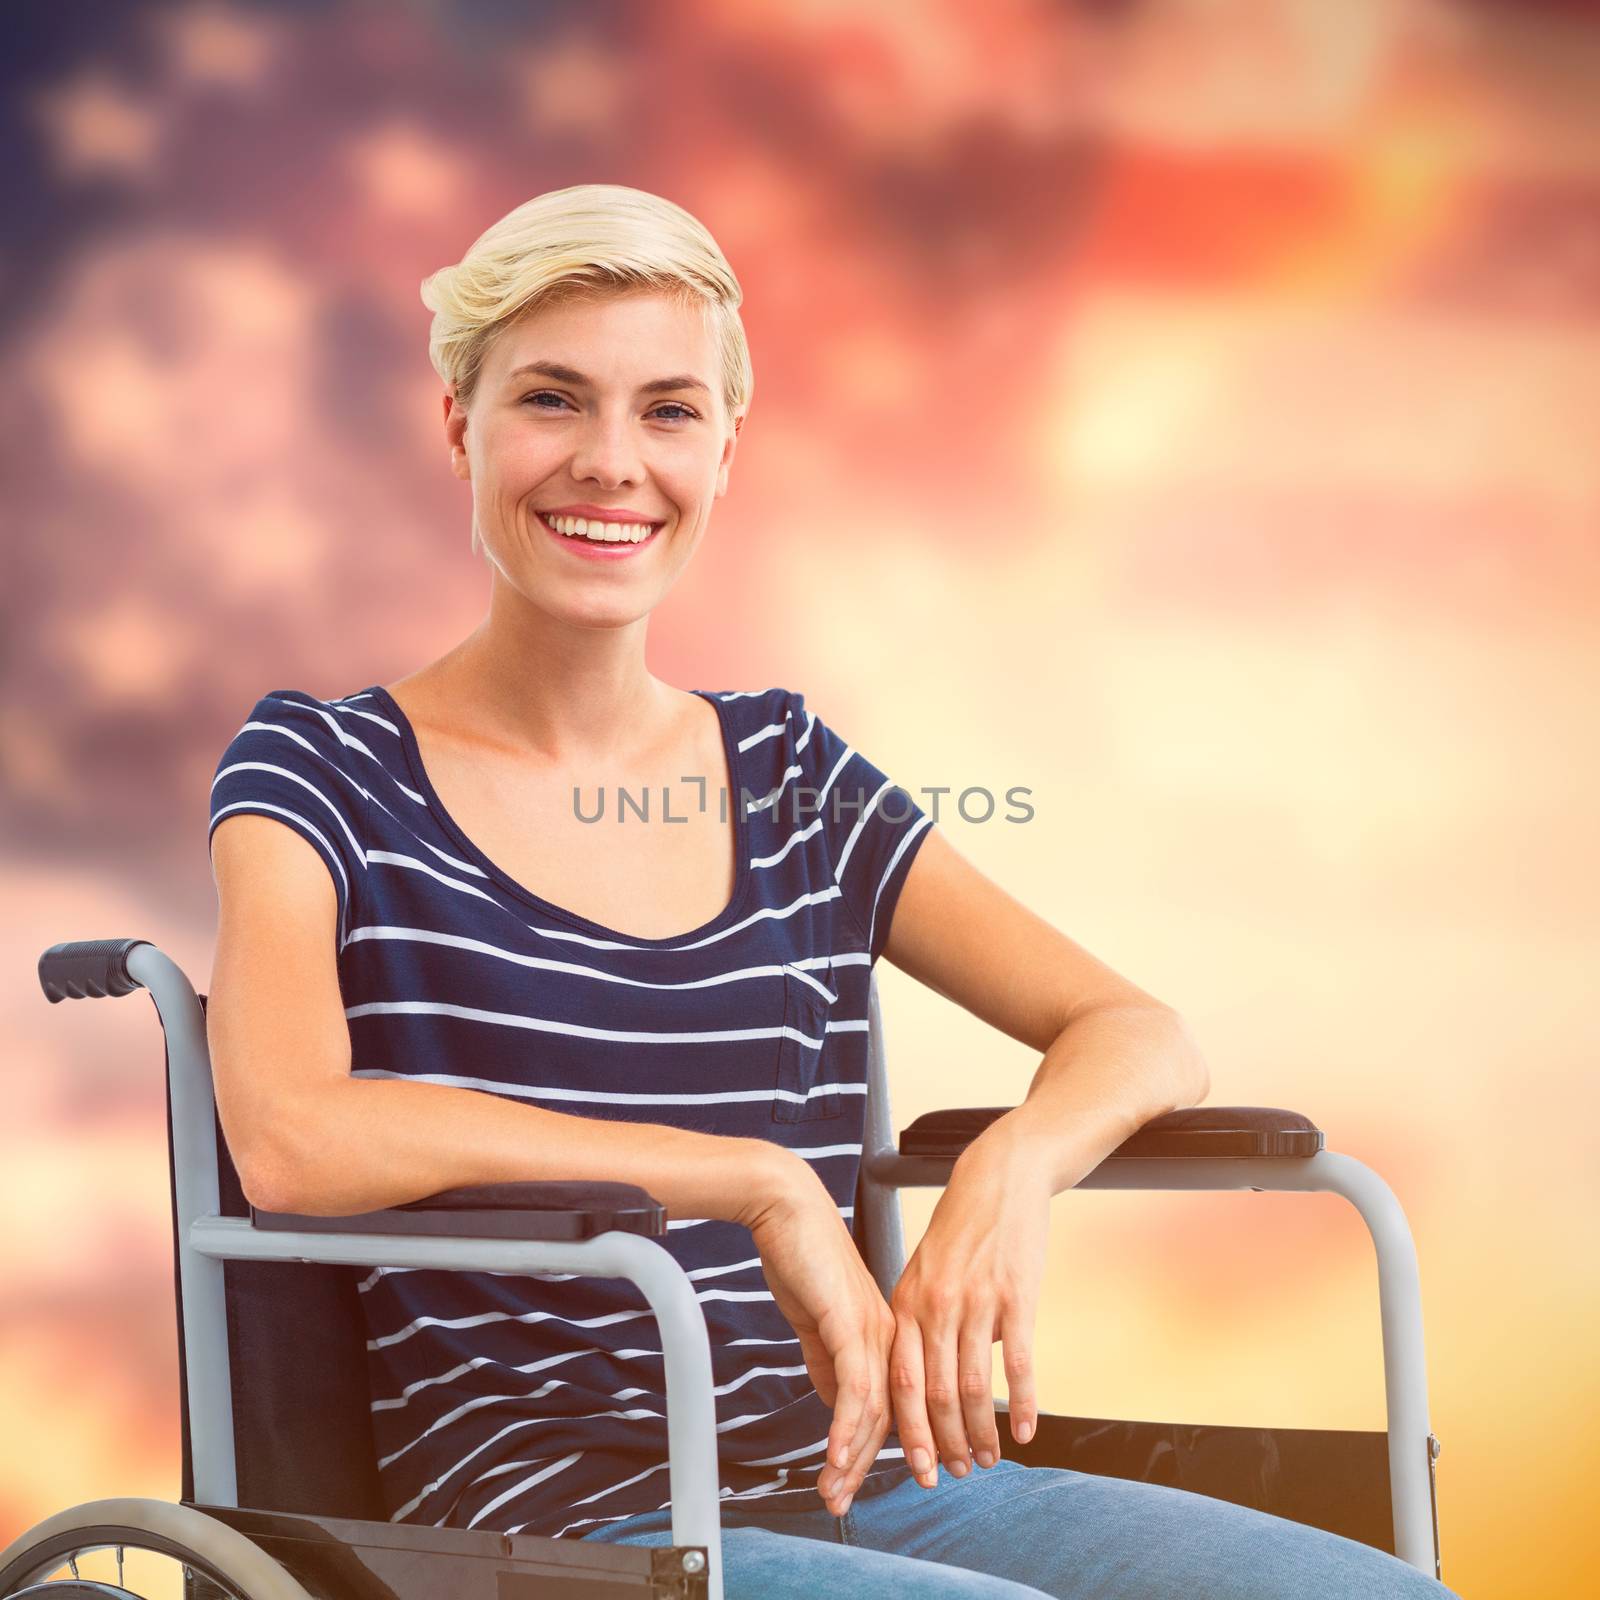 Smiling woman in a wheelchair against composite image of white fireworks exploding on black background